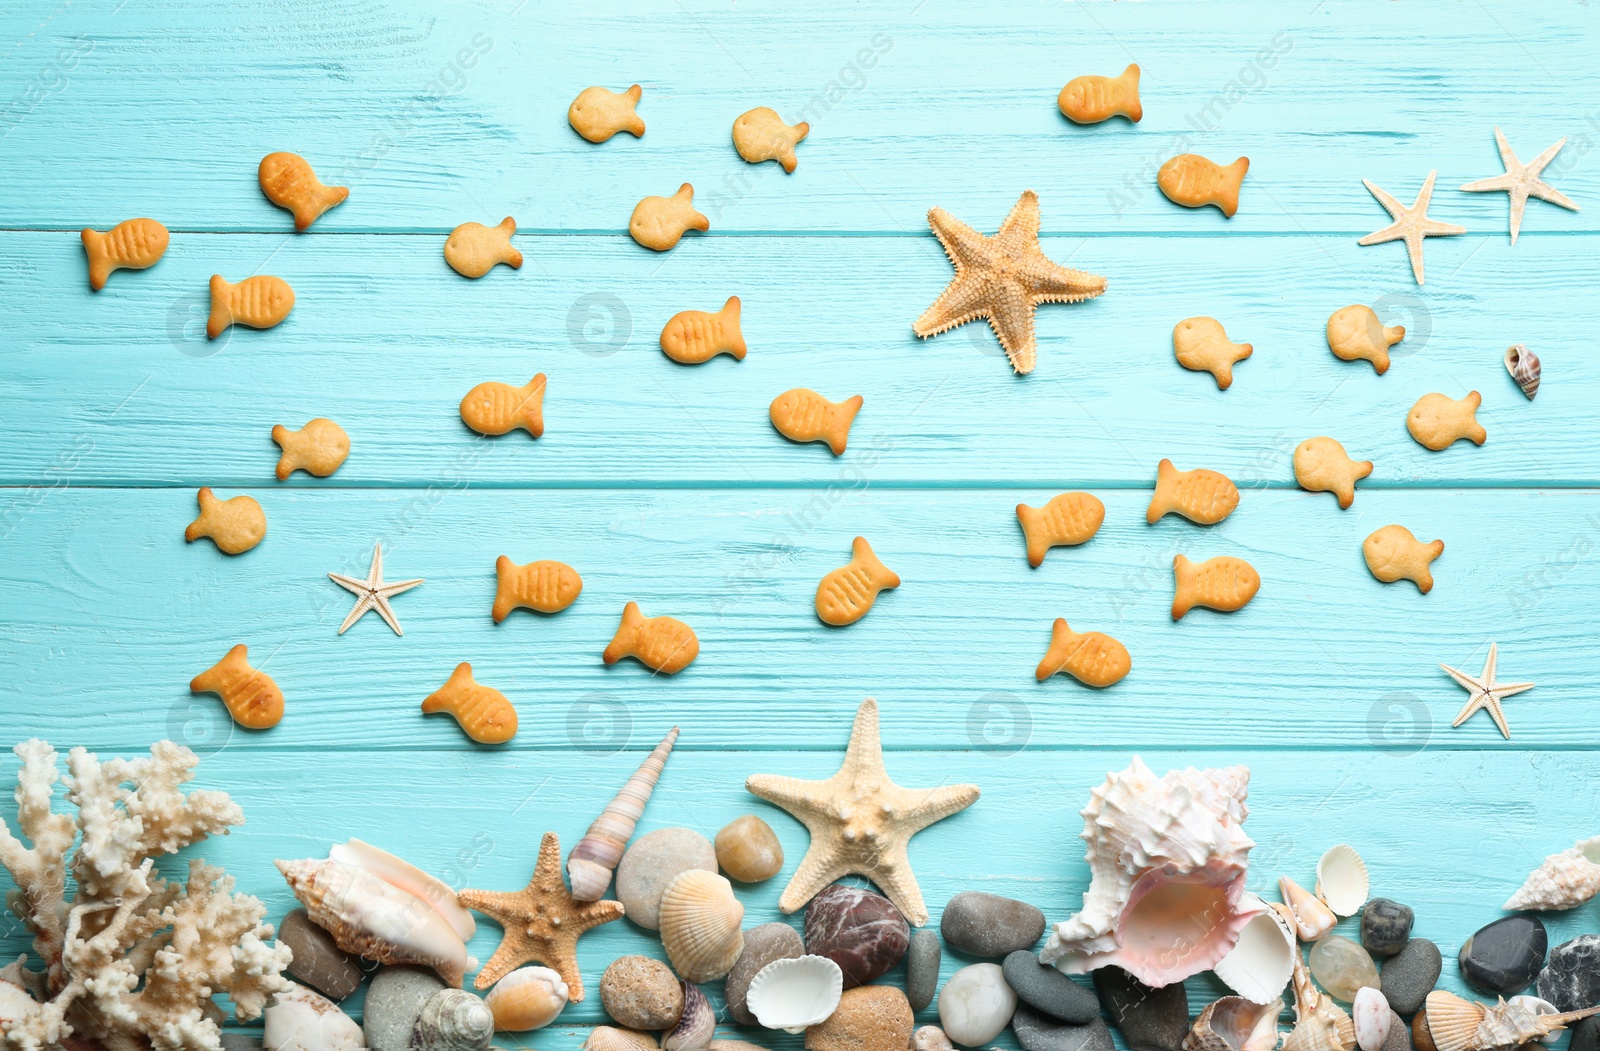 Photo of Underwater life represented with goldfish crackers on light blue wooden table, flat lay